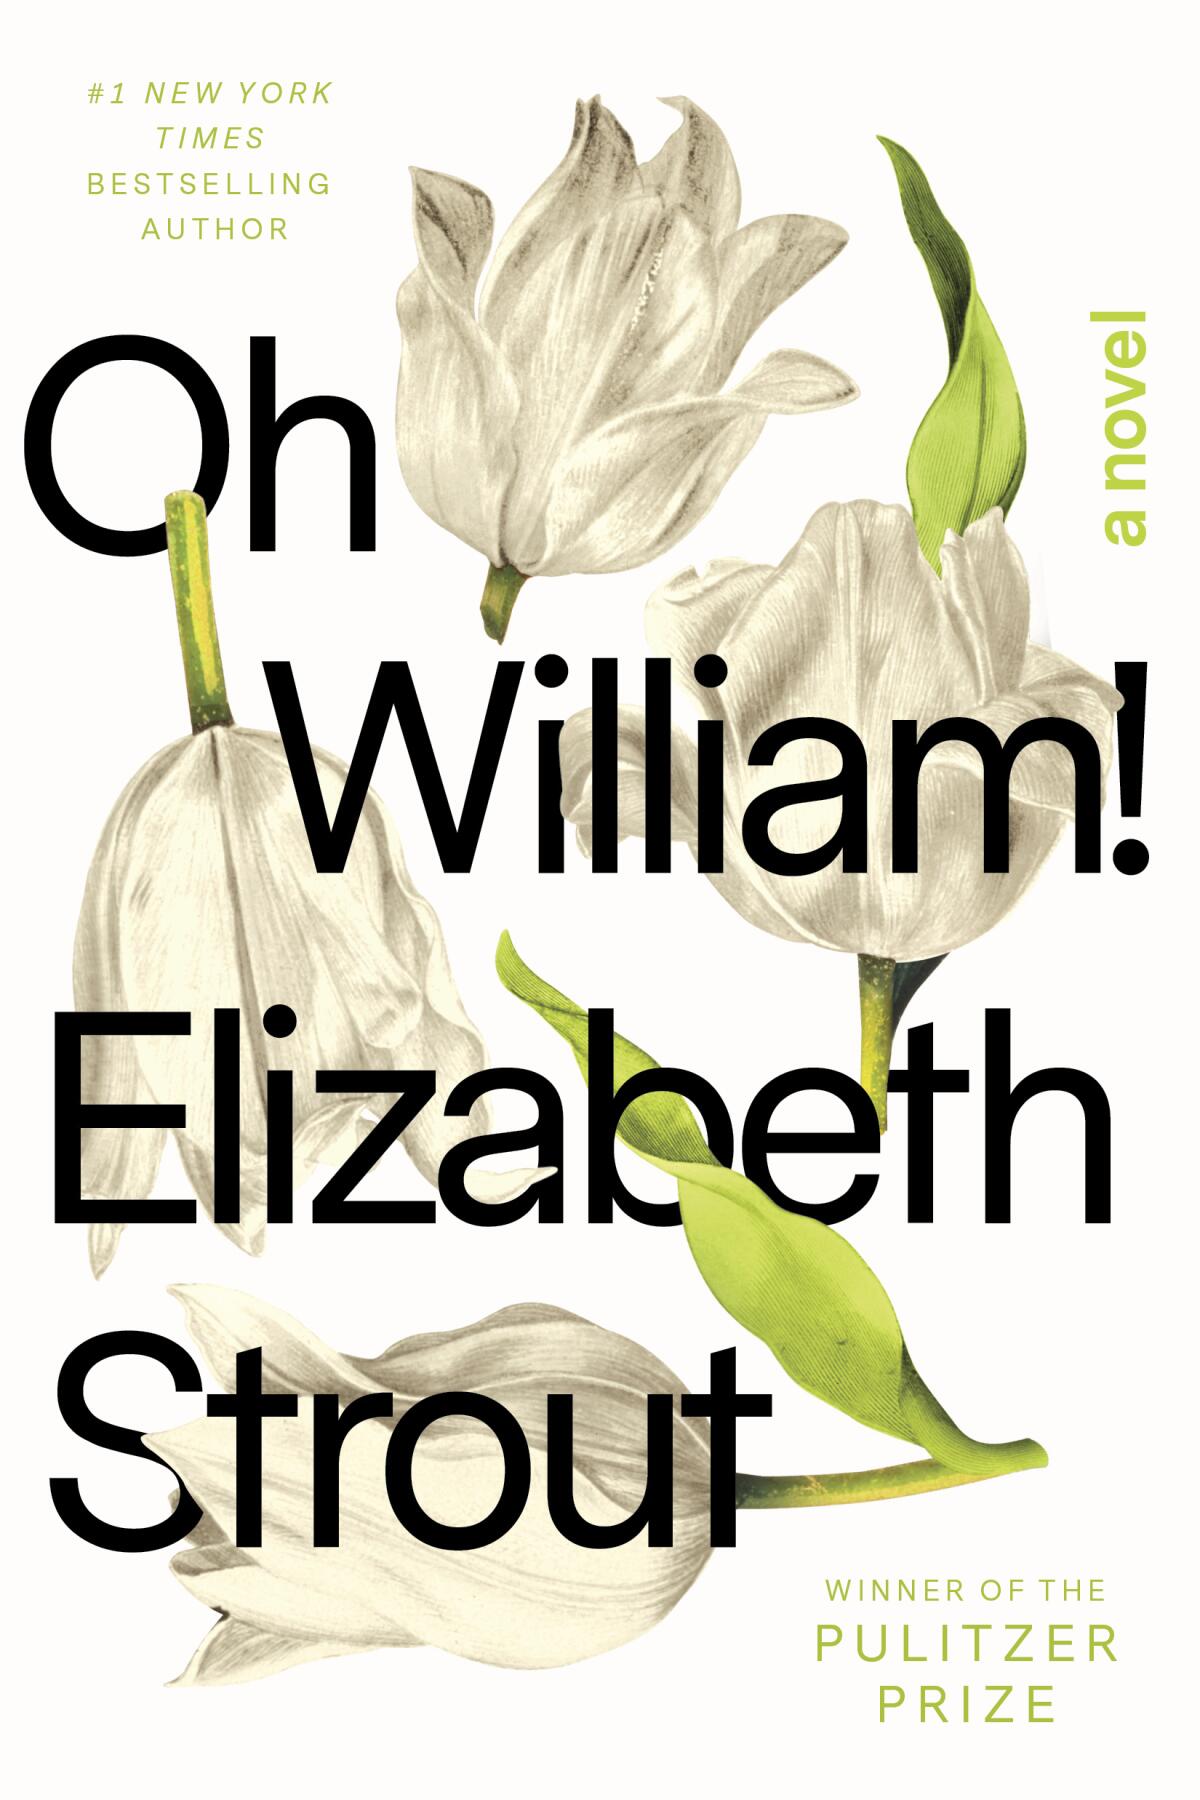 This cover image released by Random House shows "Oh William!" by Elizabeth Strout. (Random House via AP)